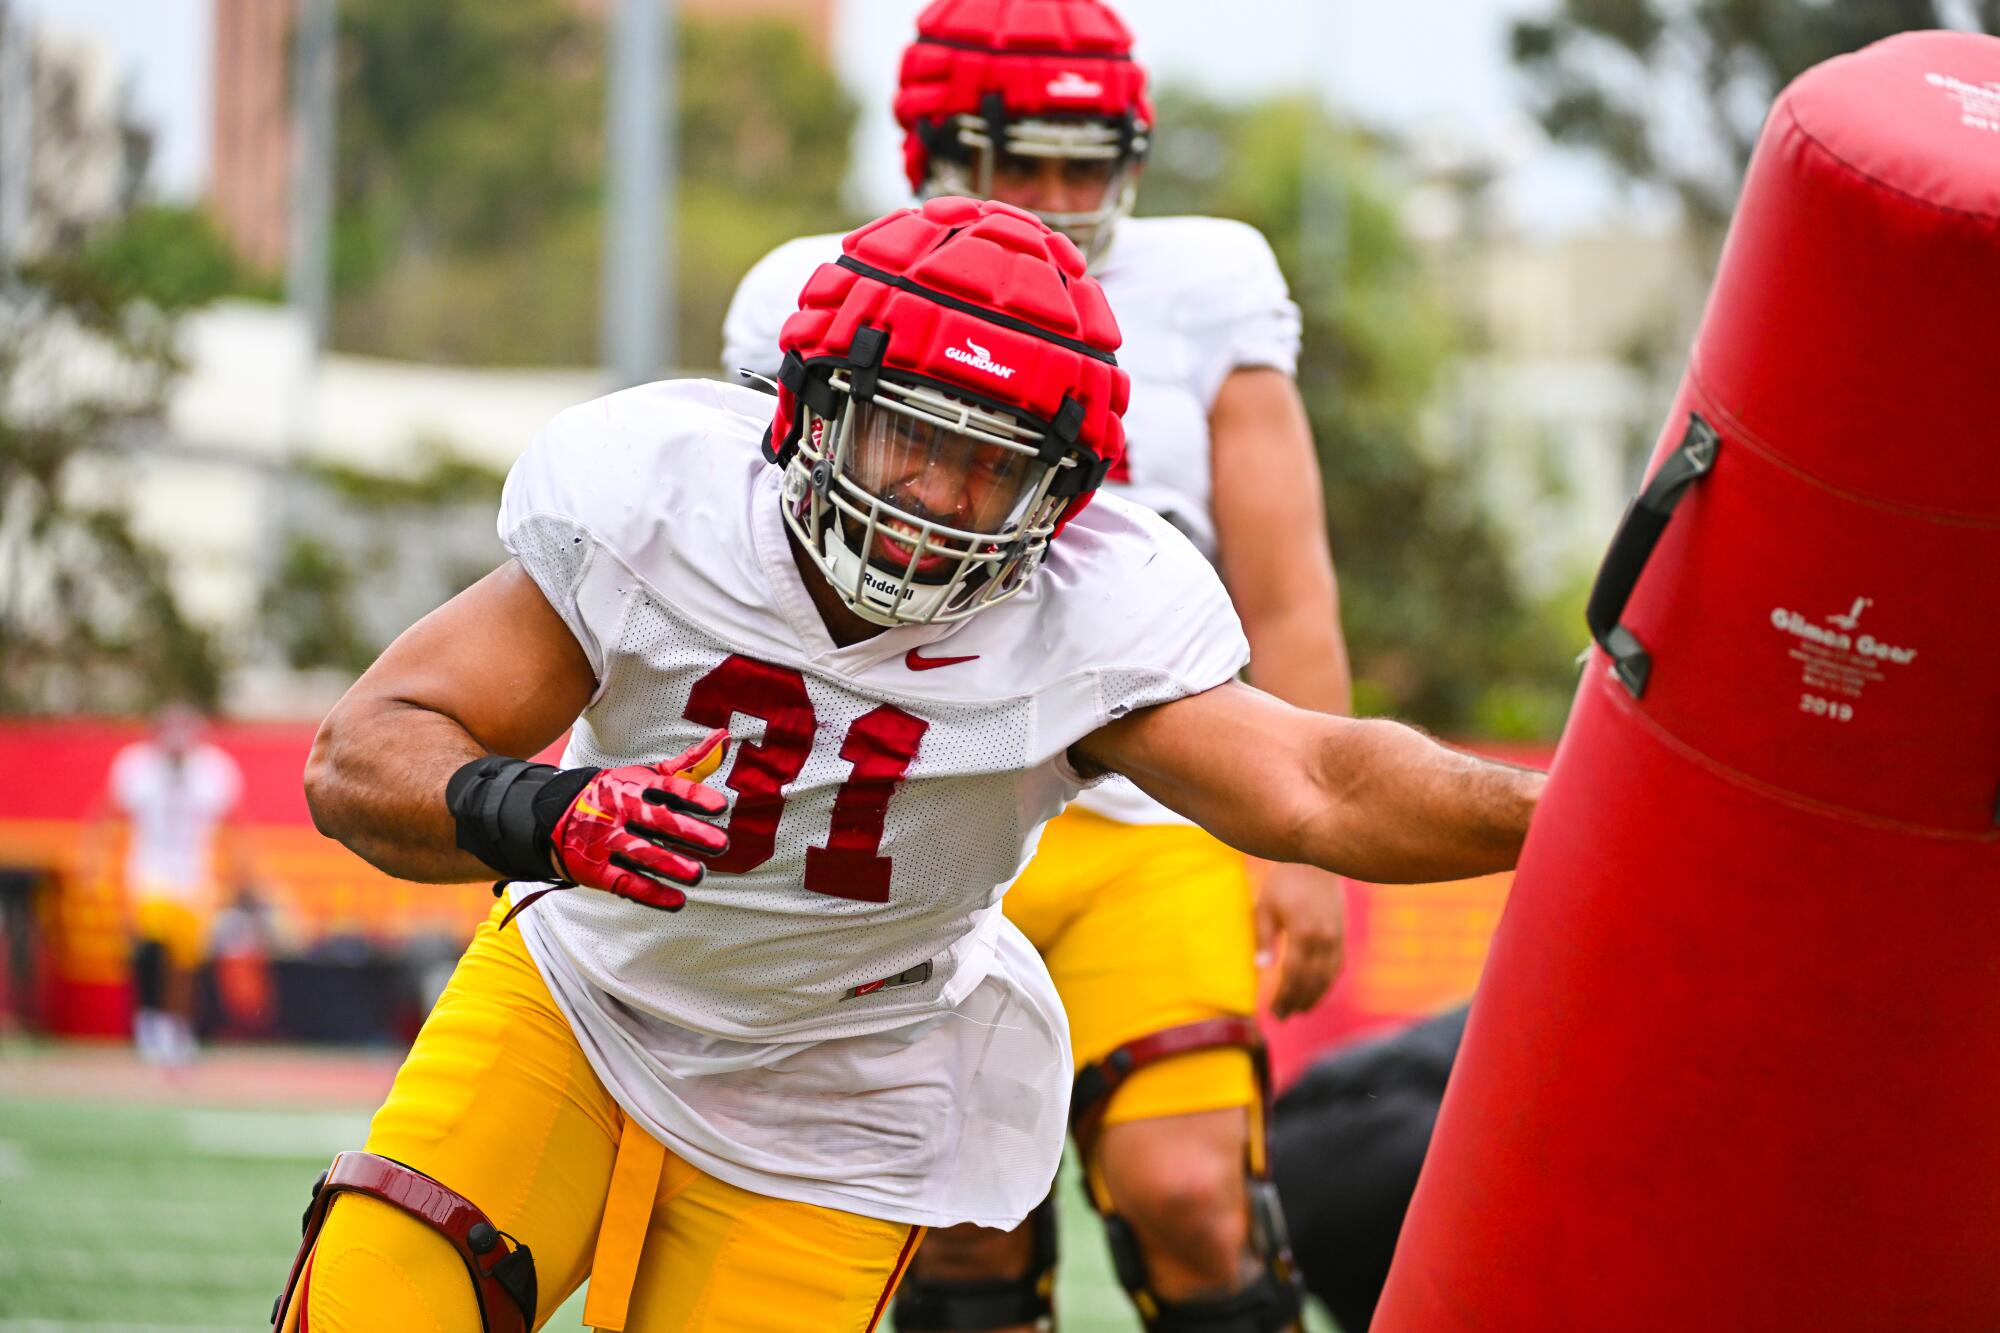 USC defensive lineman Tyrone Taleni takes part in a practice drill.